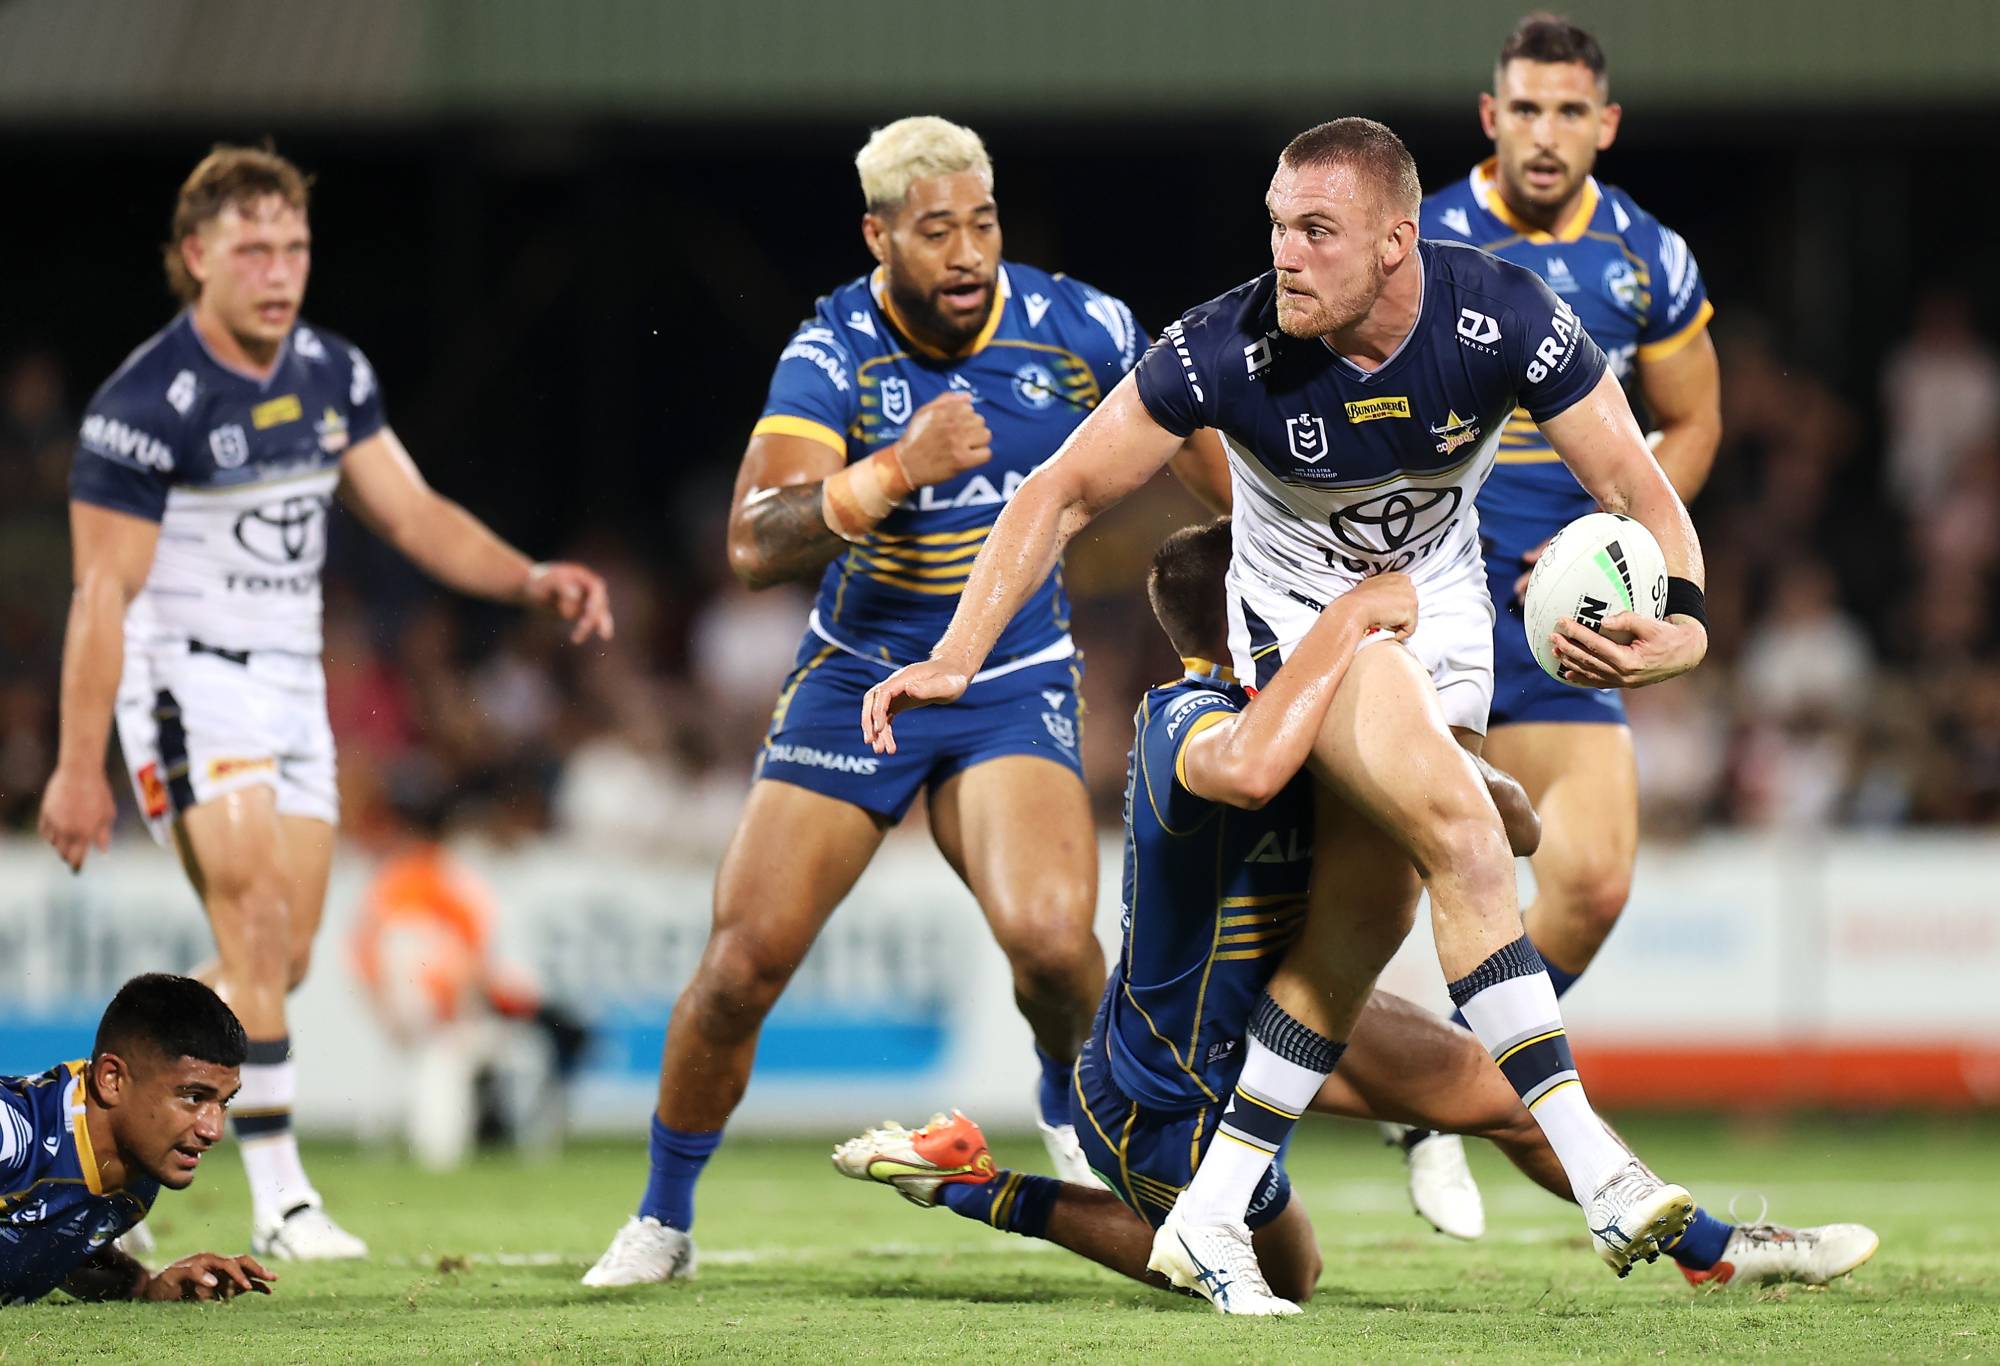 DARWIN, AUSTRALIA - APRIL 30: Coen Hess of the Cowboys looks to pass as he is tackled during the round eight NRL match between the Parramatta Eels and the North Queensland Cowboys at TIO Stadium, on April 30, 2022, in Darwin, Australia. (Photo by Mark Kolbe/Getty Images)